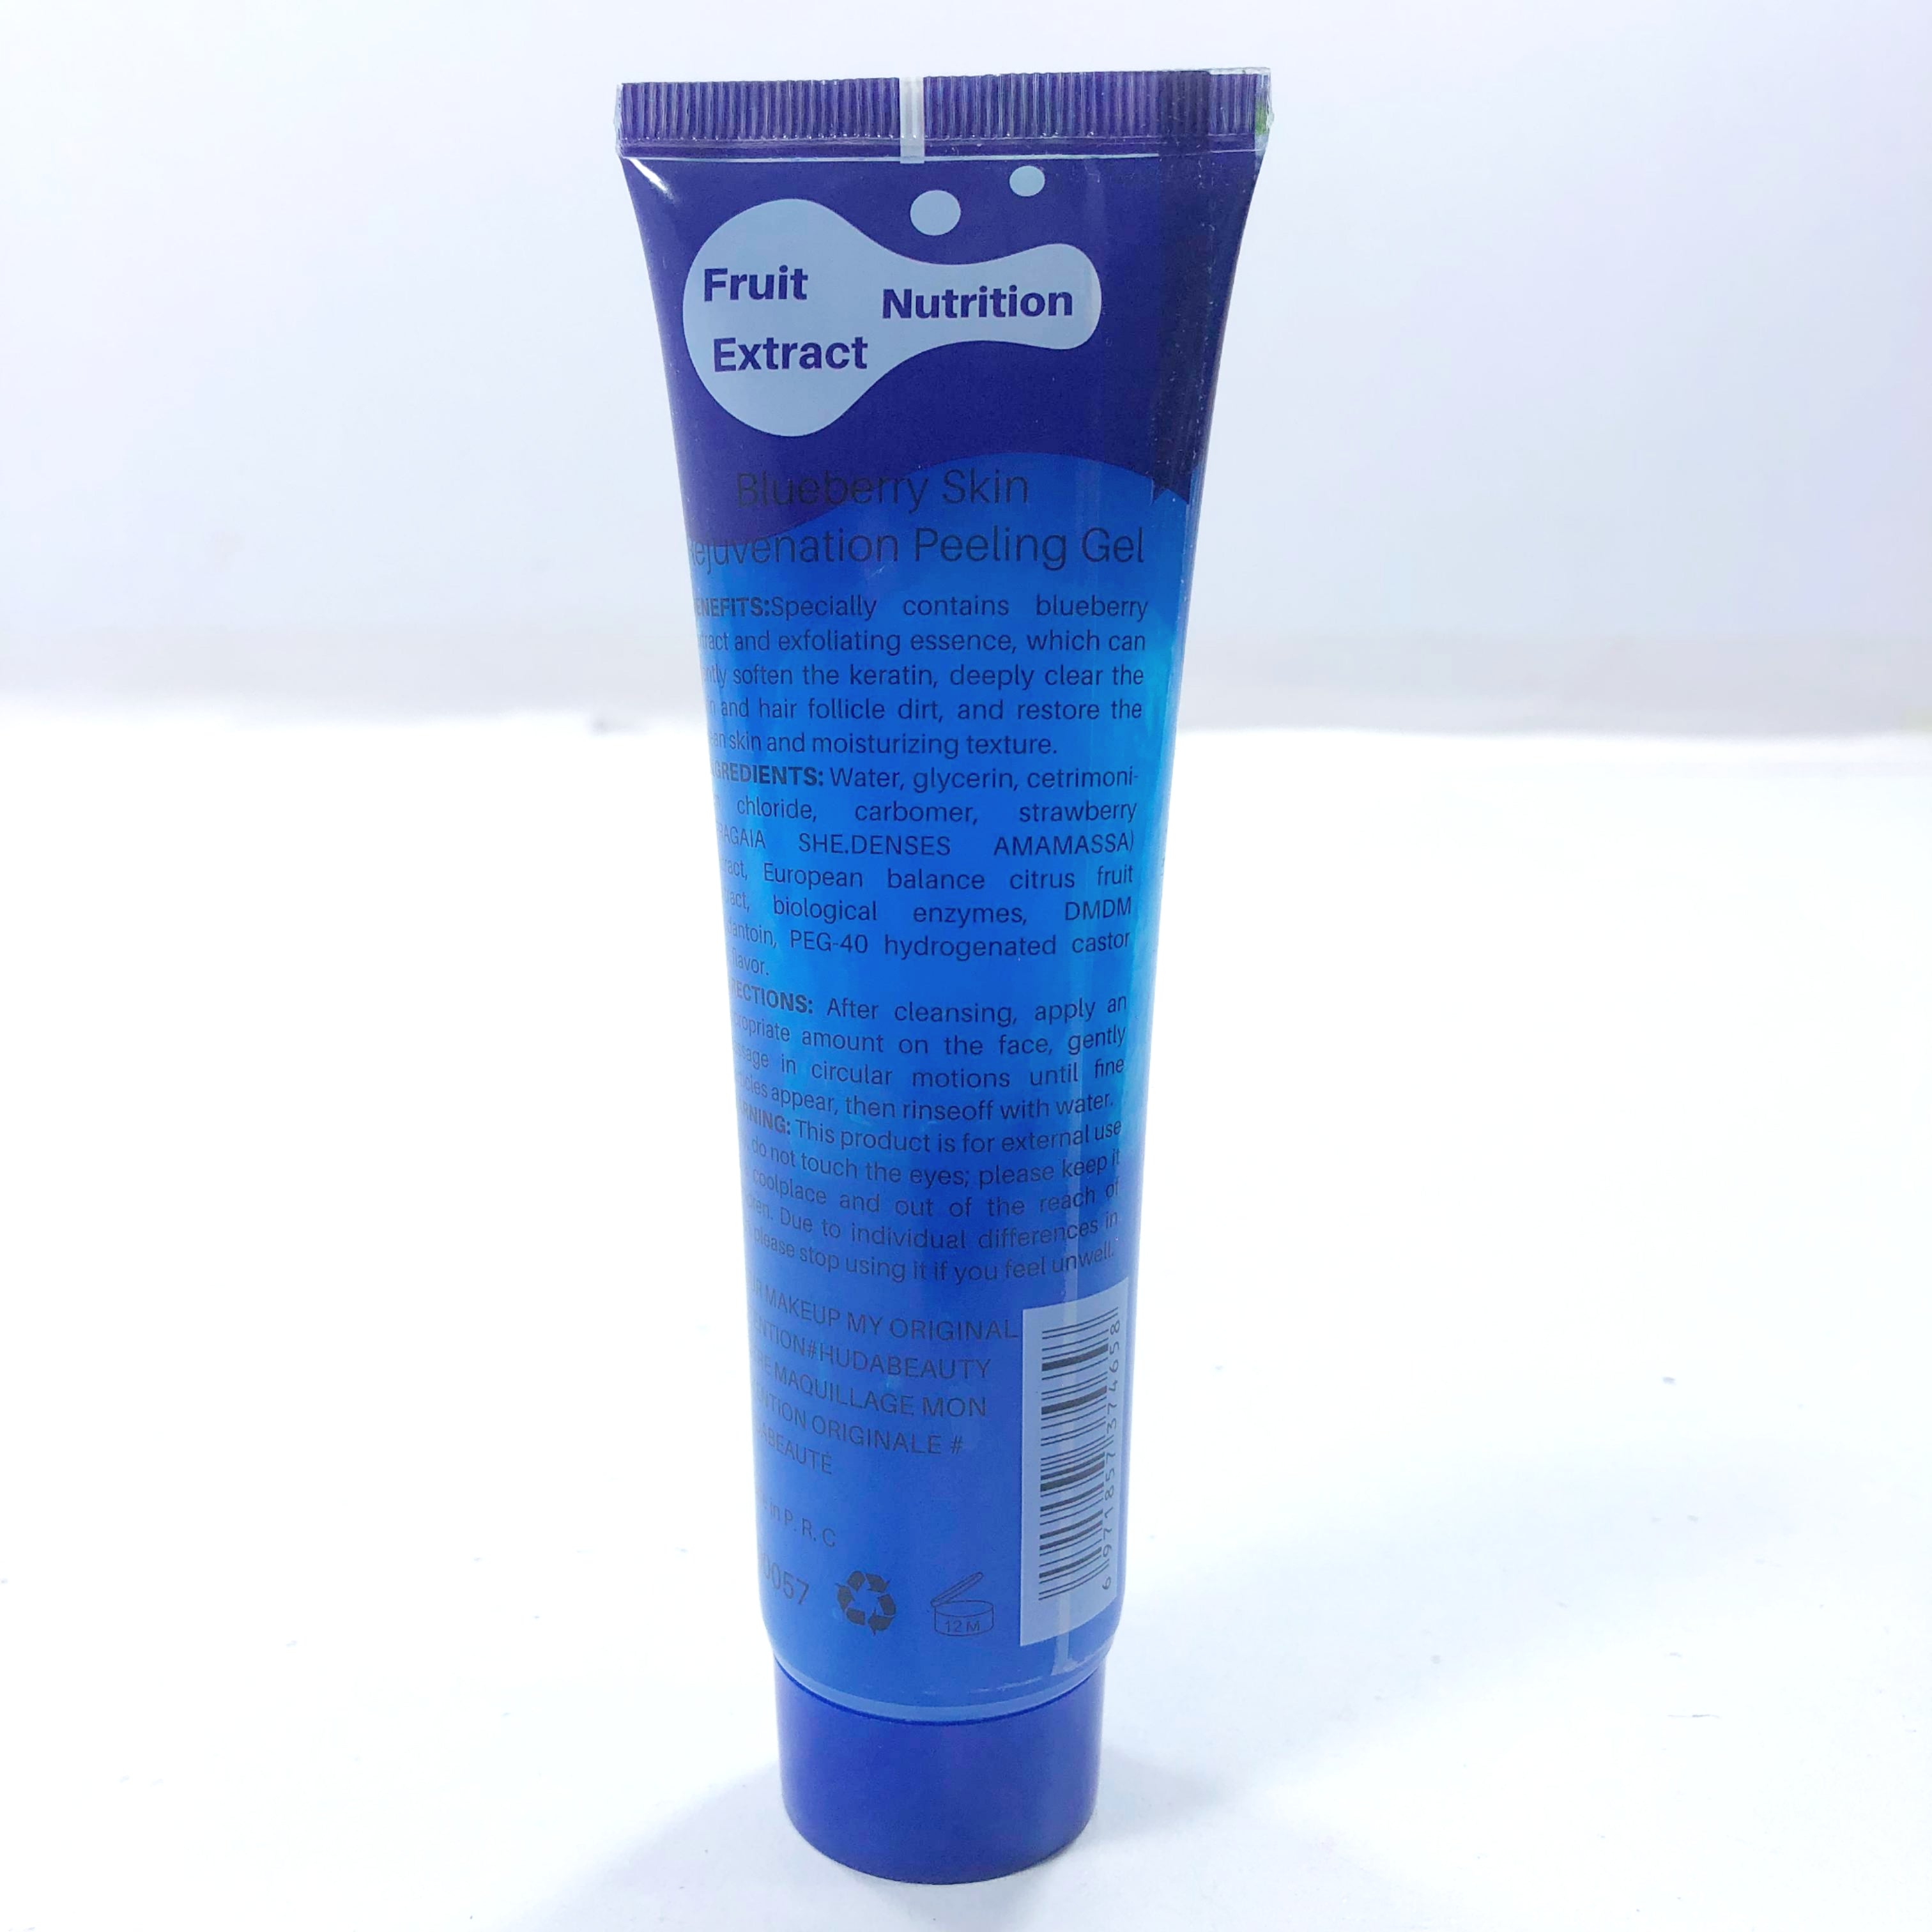 FACIAL CLEANSER BLUEBERRY HUDABEAUTY PROFESSIONAL